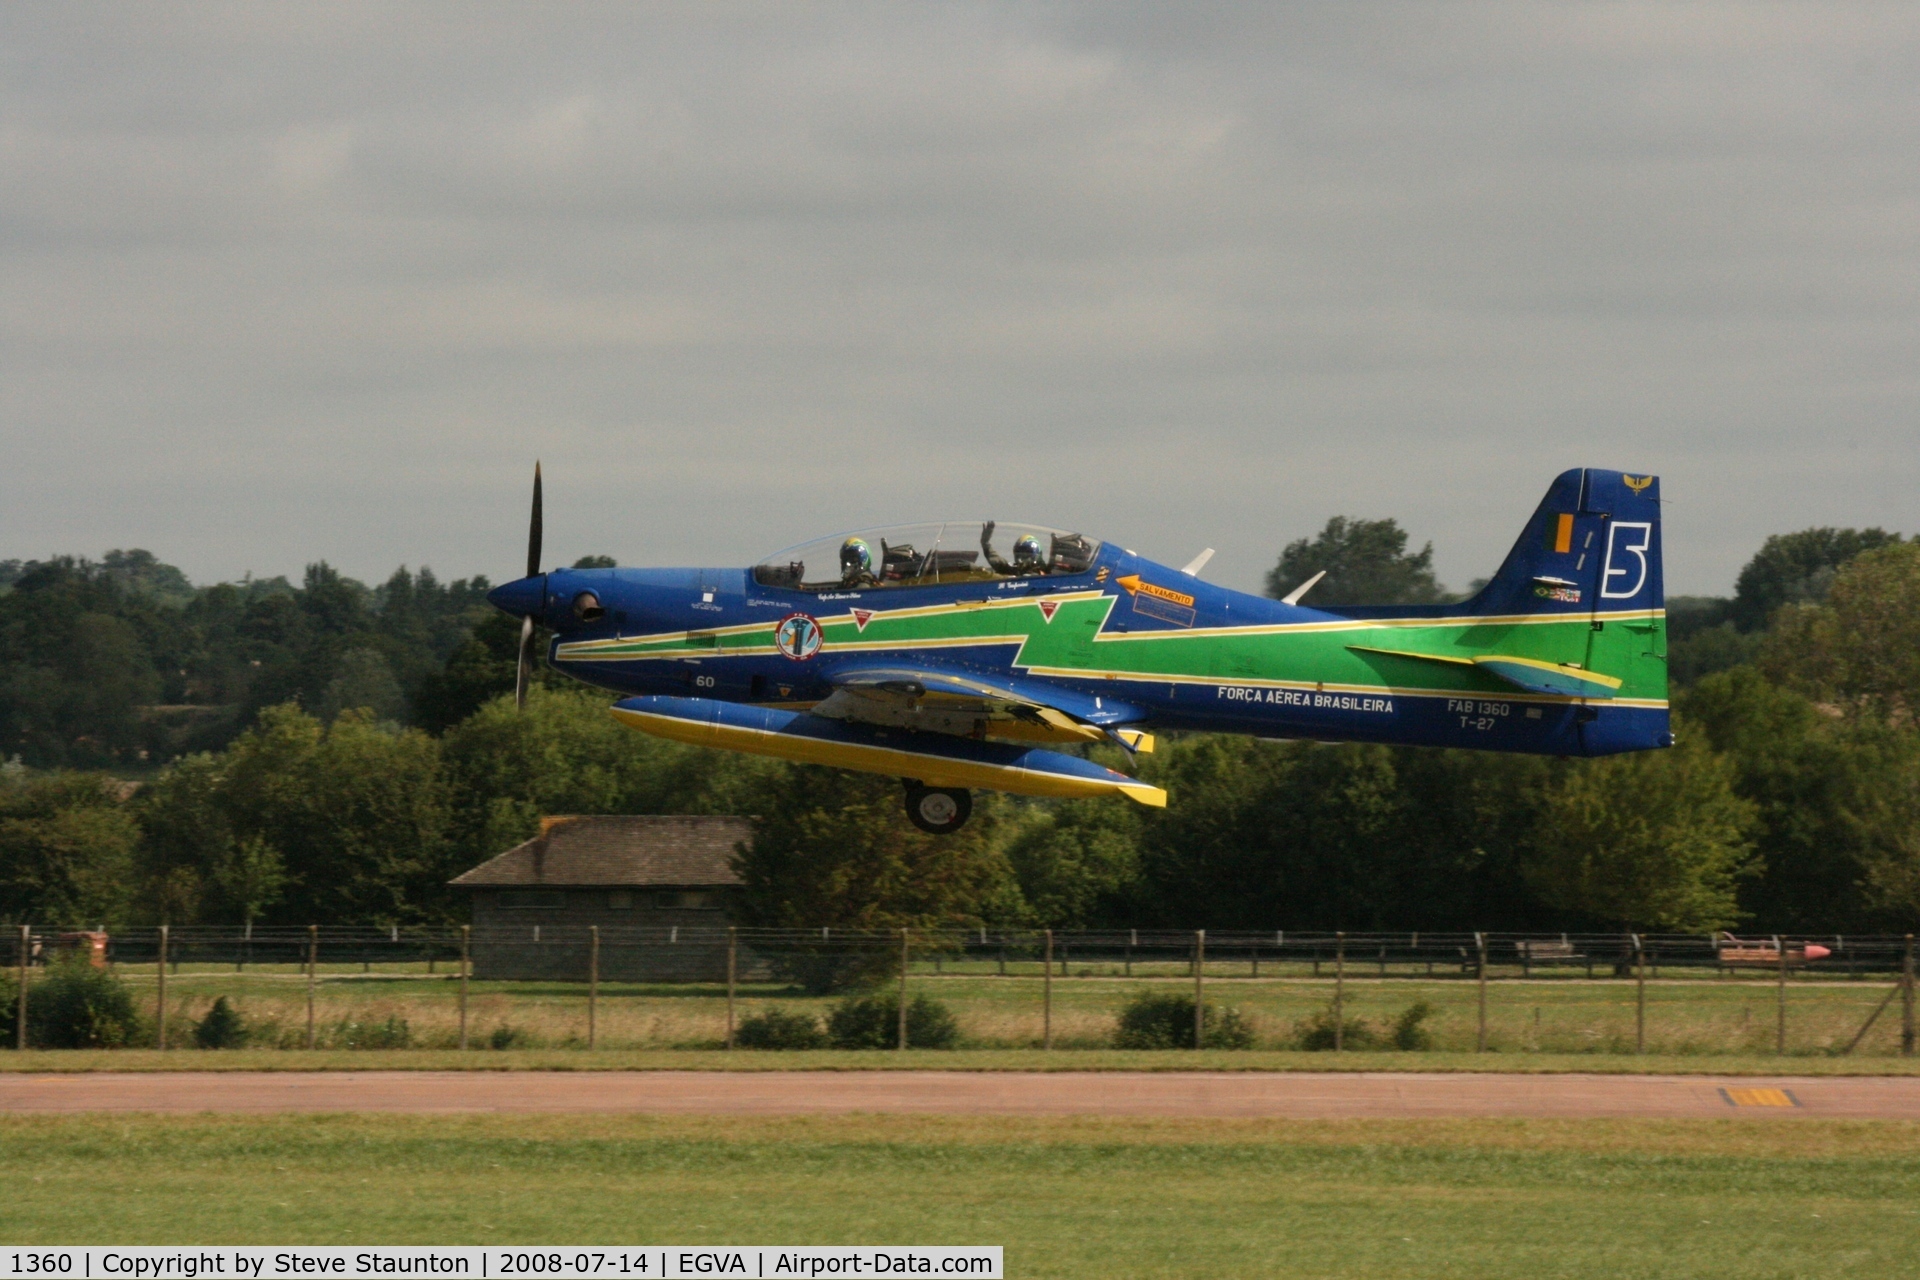 1360, Embraer T-27 Tucano (EMB-312) C/N 312074, Taken at the Royal International Air Tattoo 2008 during arrivals and departures (show days cancelled due to bad weather)